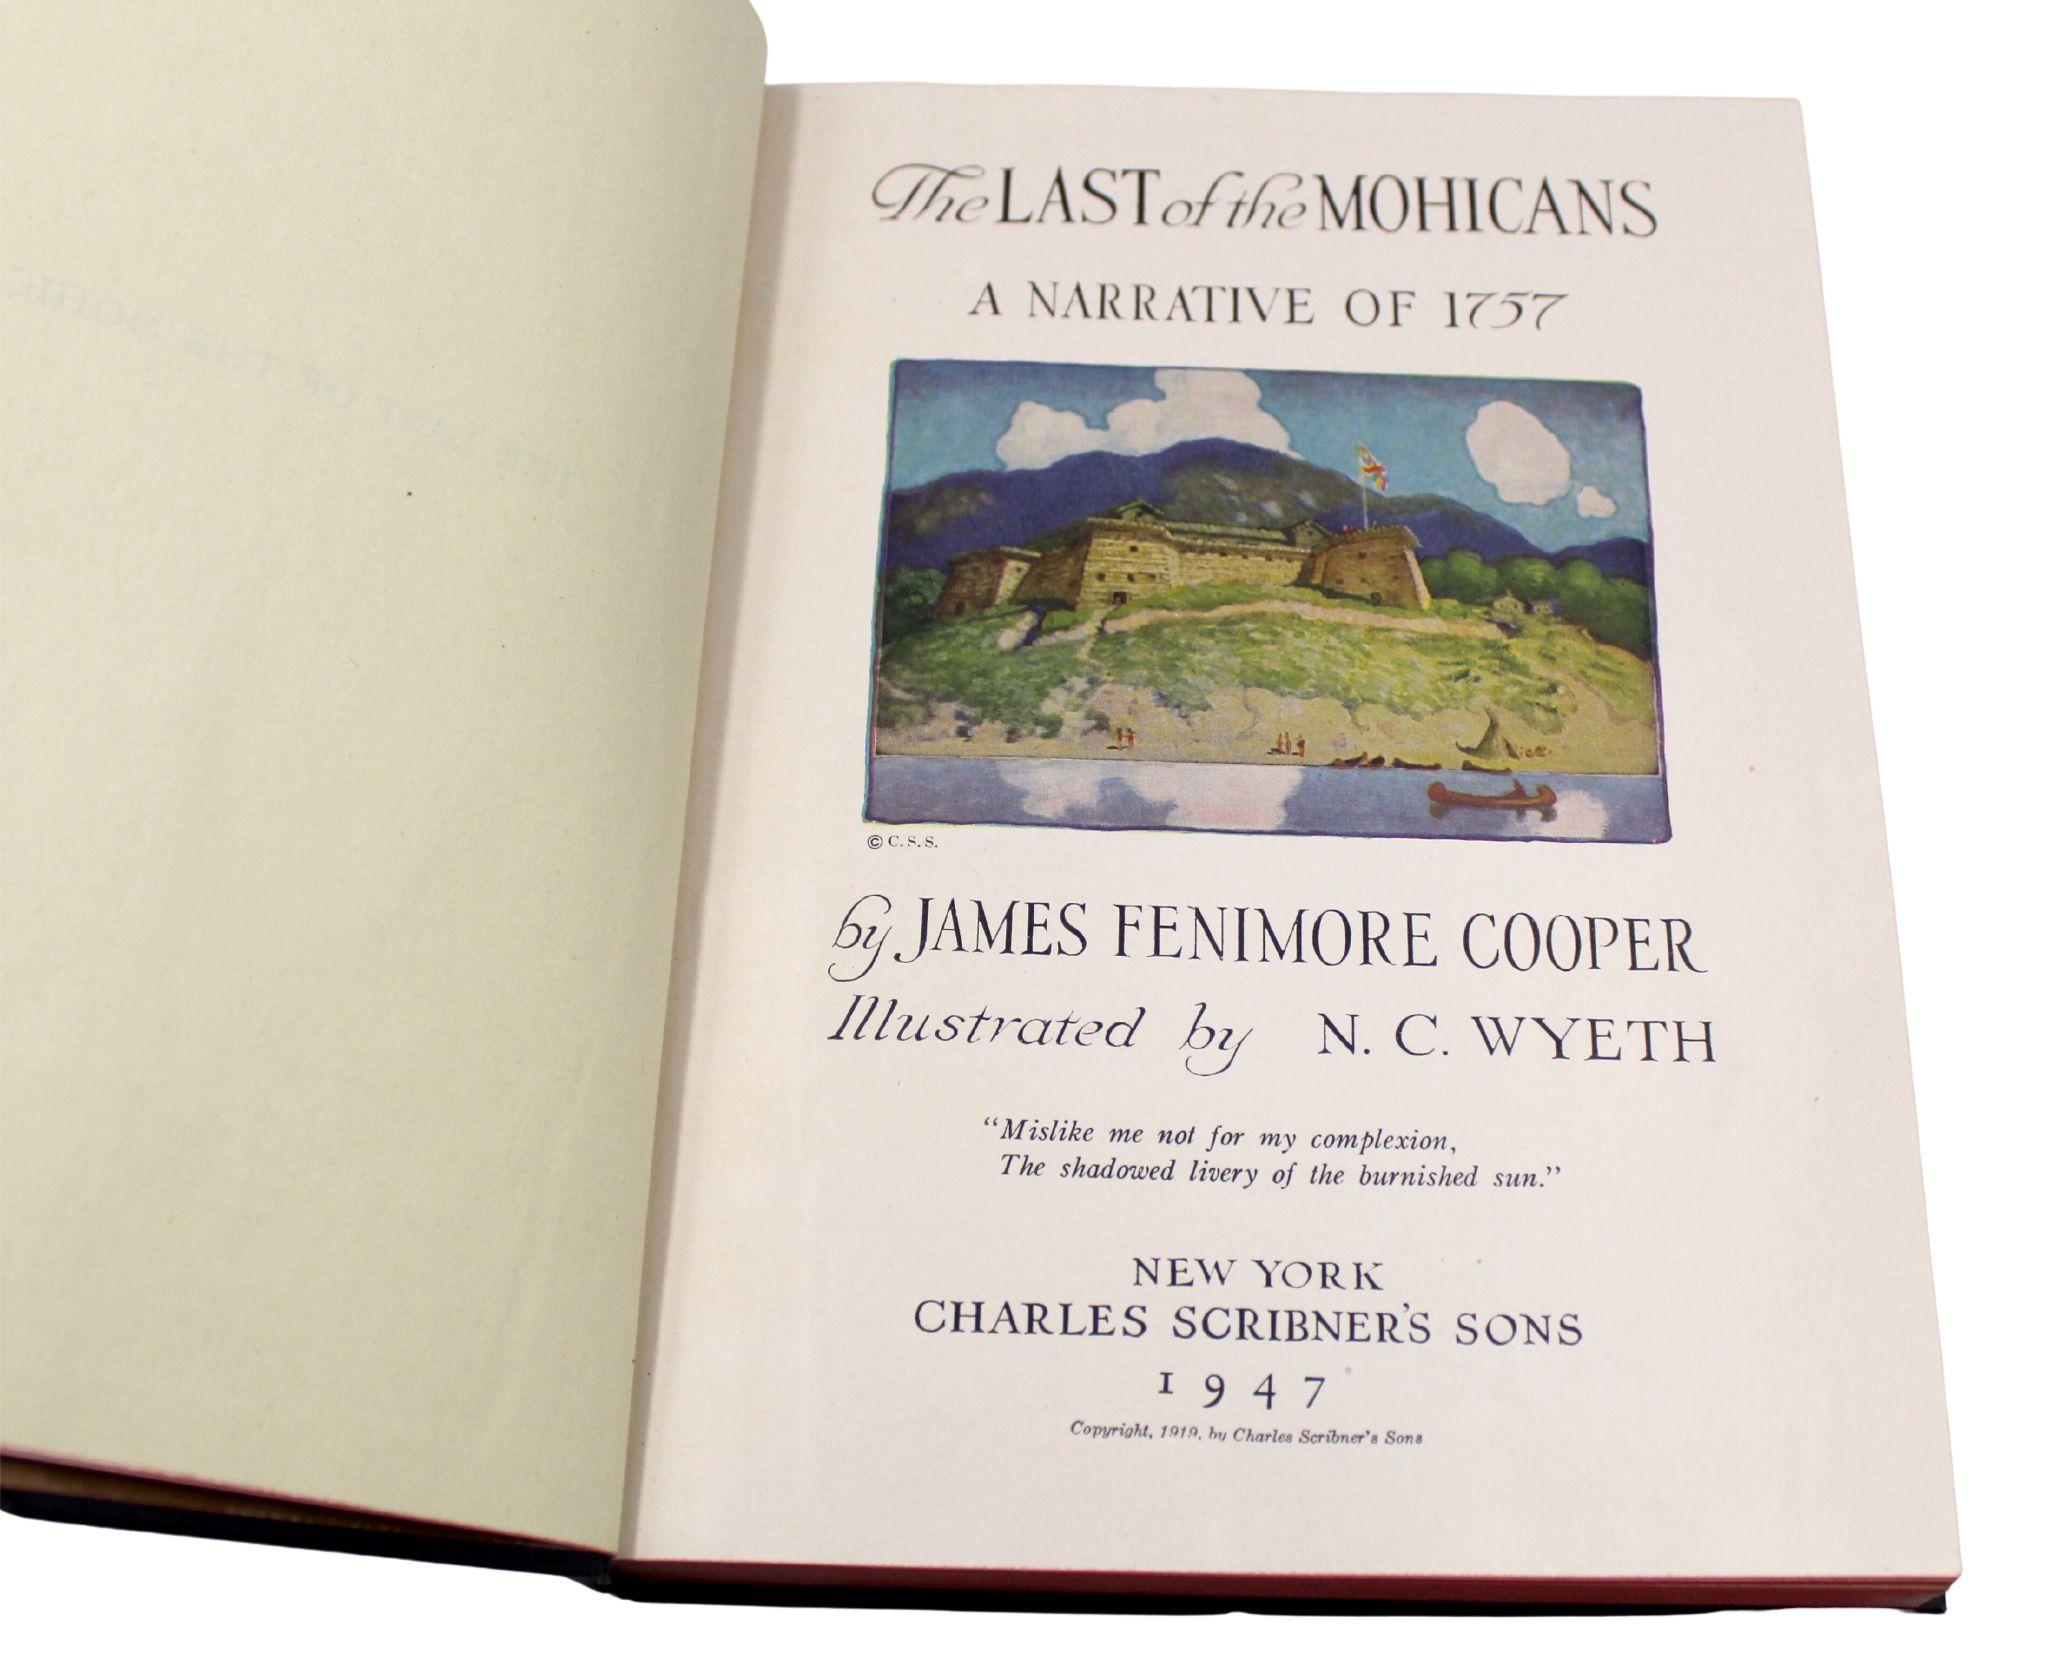 Cooper, James Fenimore. The Last of the Mohicans: A Narrative of 1757. New York: Charles Scribner's Sons, 1947. Illustrated by N.C. Wyeth. In original hardcover boards with illustrated front covers, gilt stamped titles to spine, pictorial endpaper,